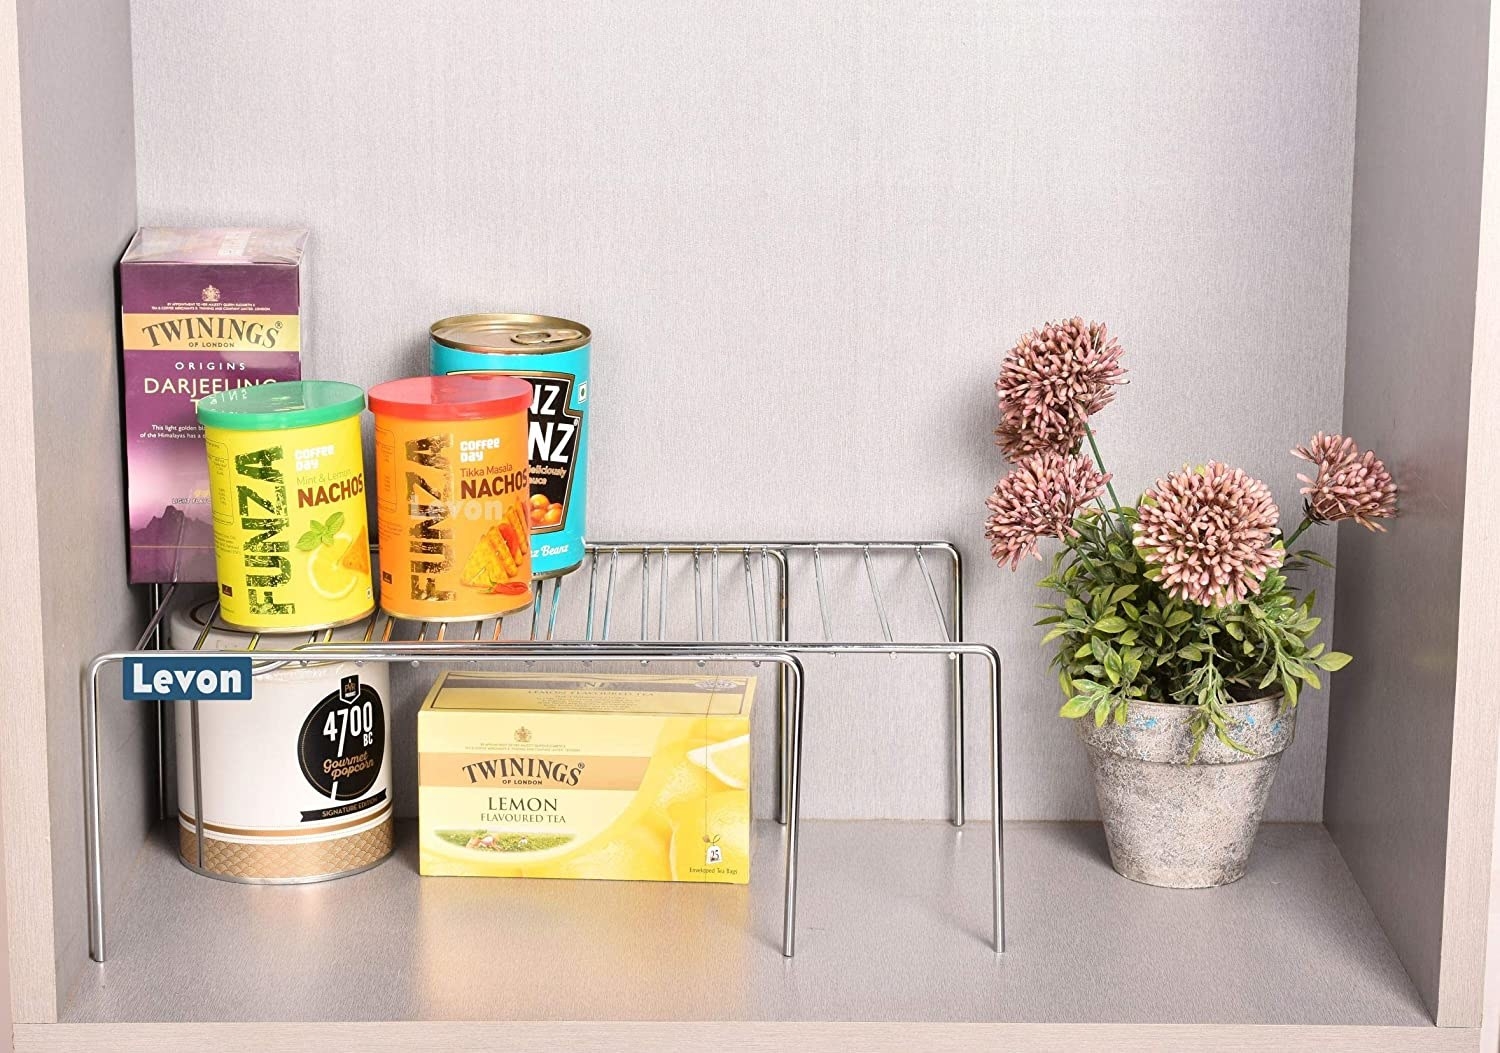 An expandable rack with kitchen ingredients on it